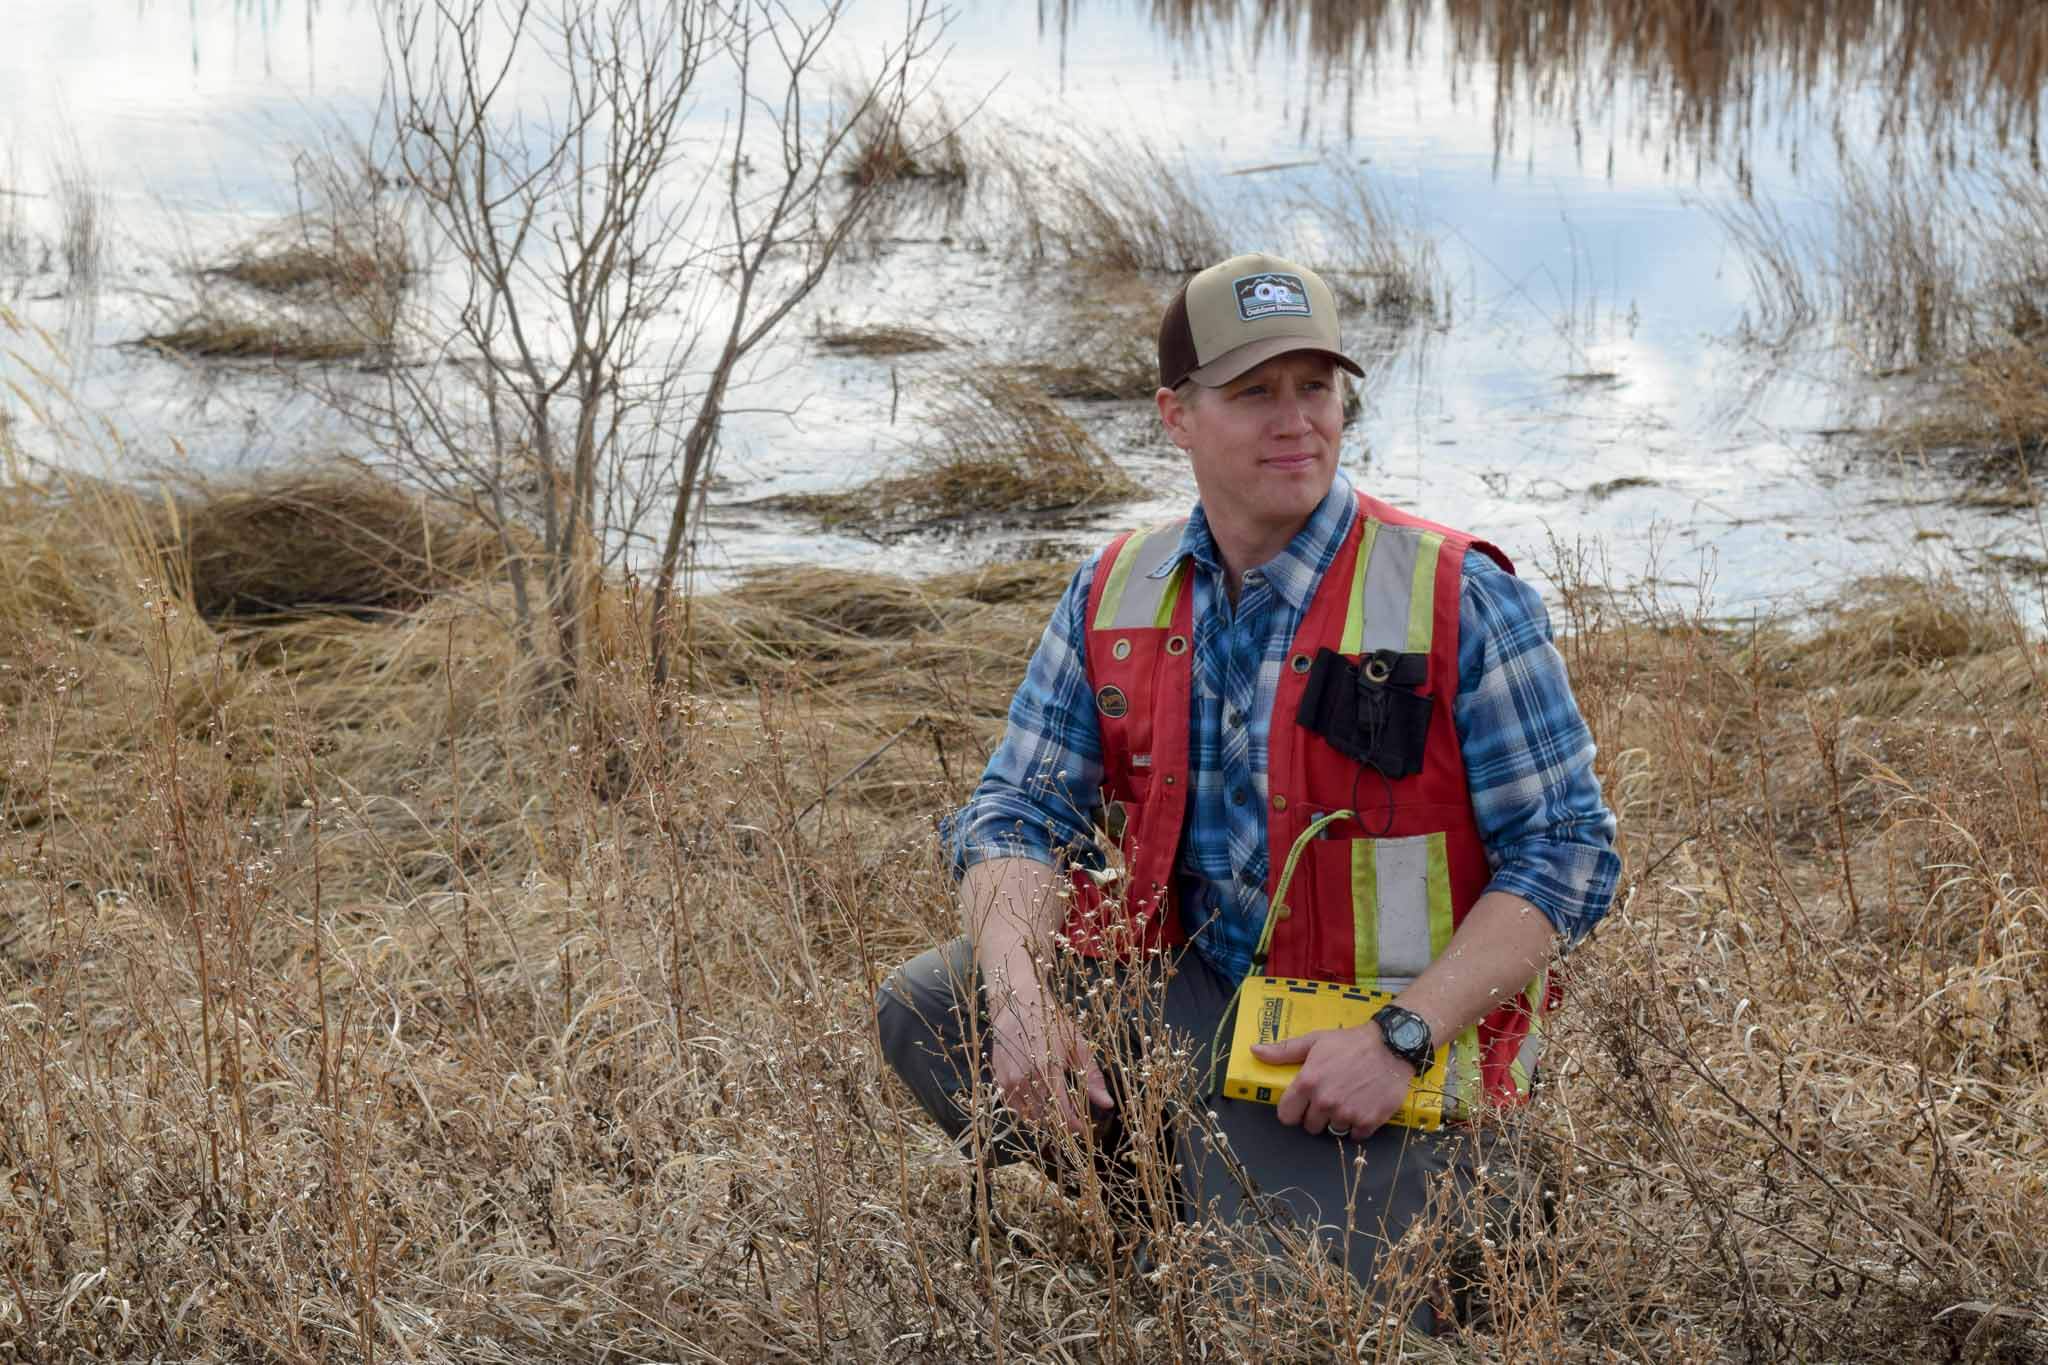 Dr. Scott Ketcheson, an Athabasca University researcher and the Canada Research Chair in Hydrological Sustainability, has been awarded a contract from Suncor to study reclamation efforts at Lake Miwasin.